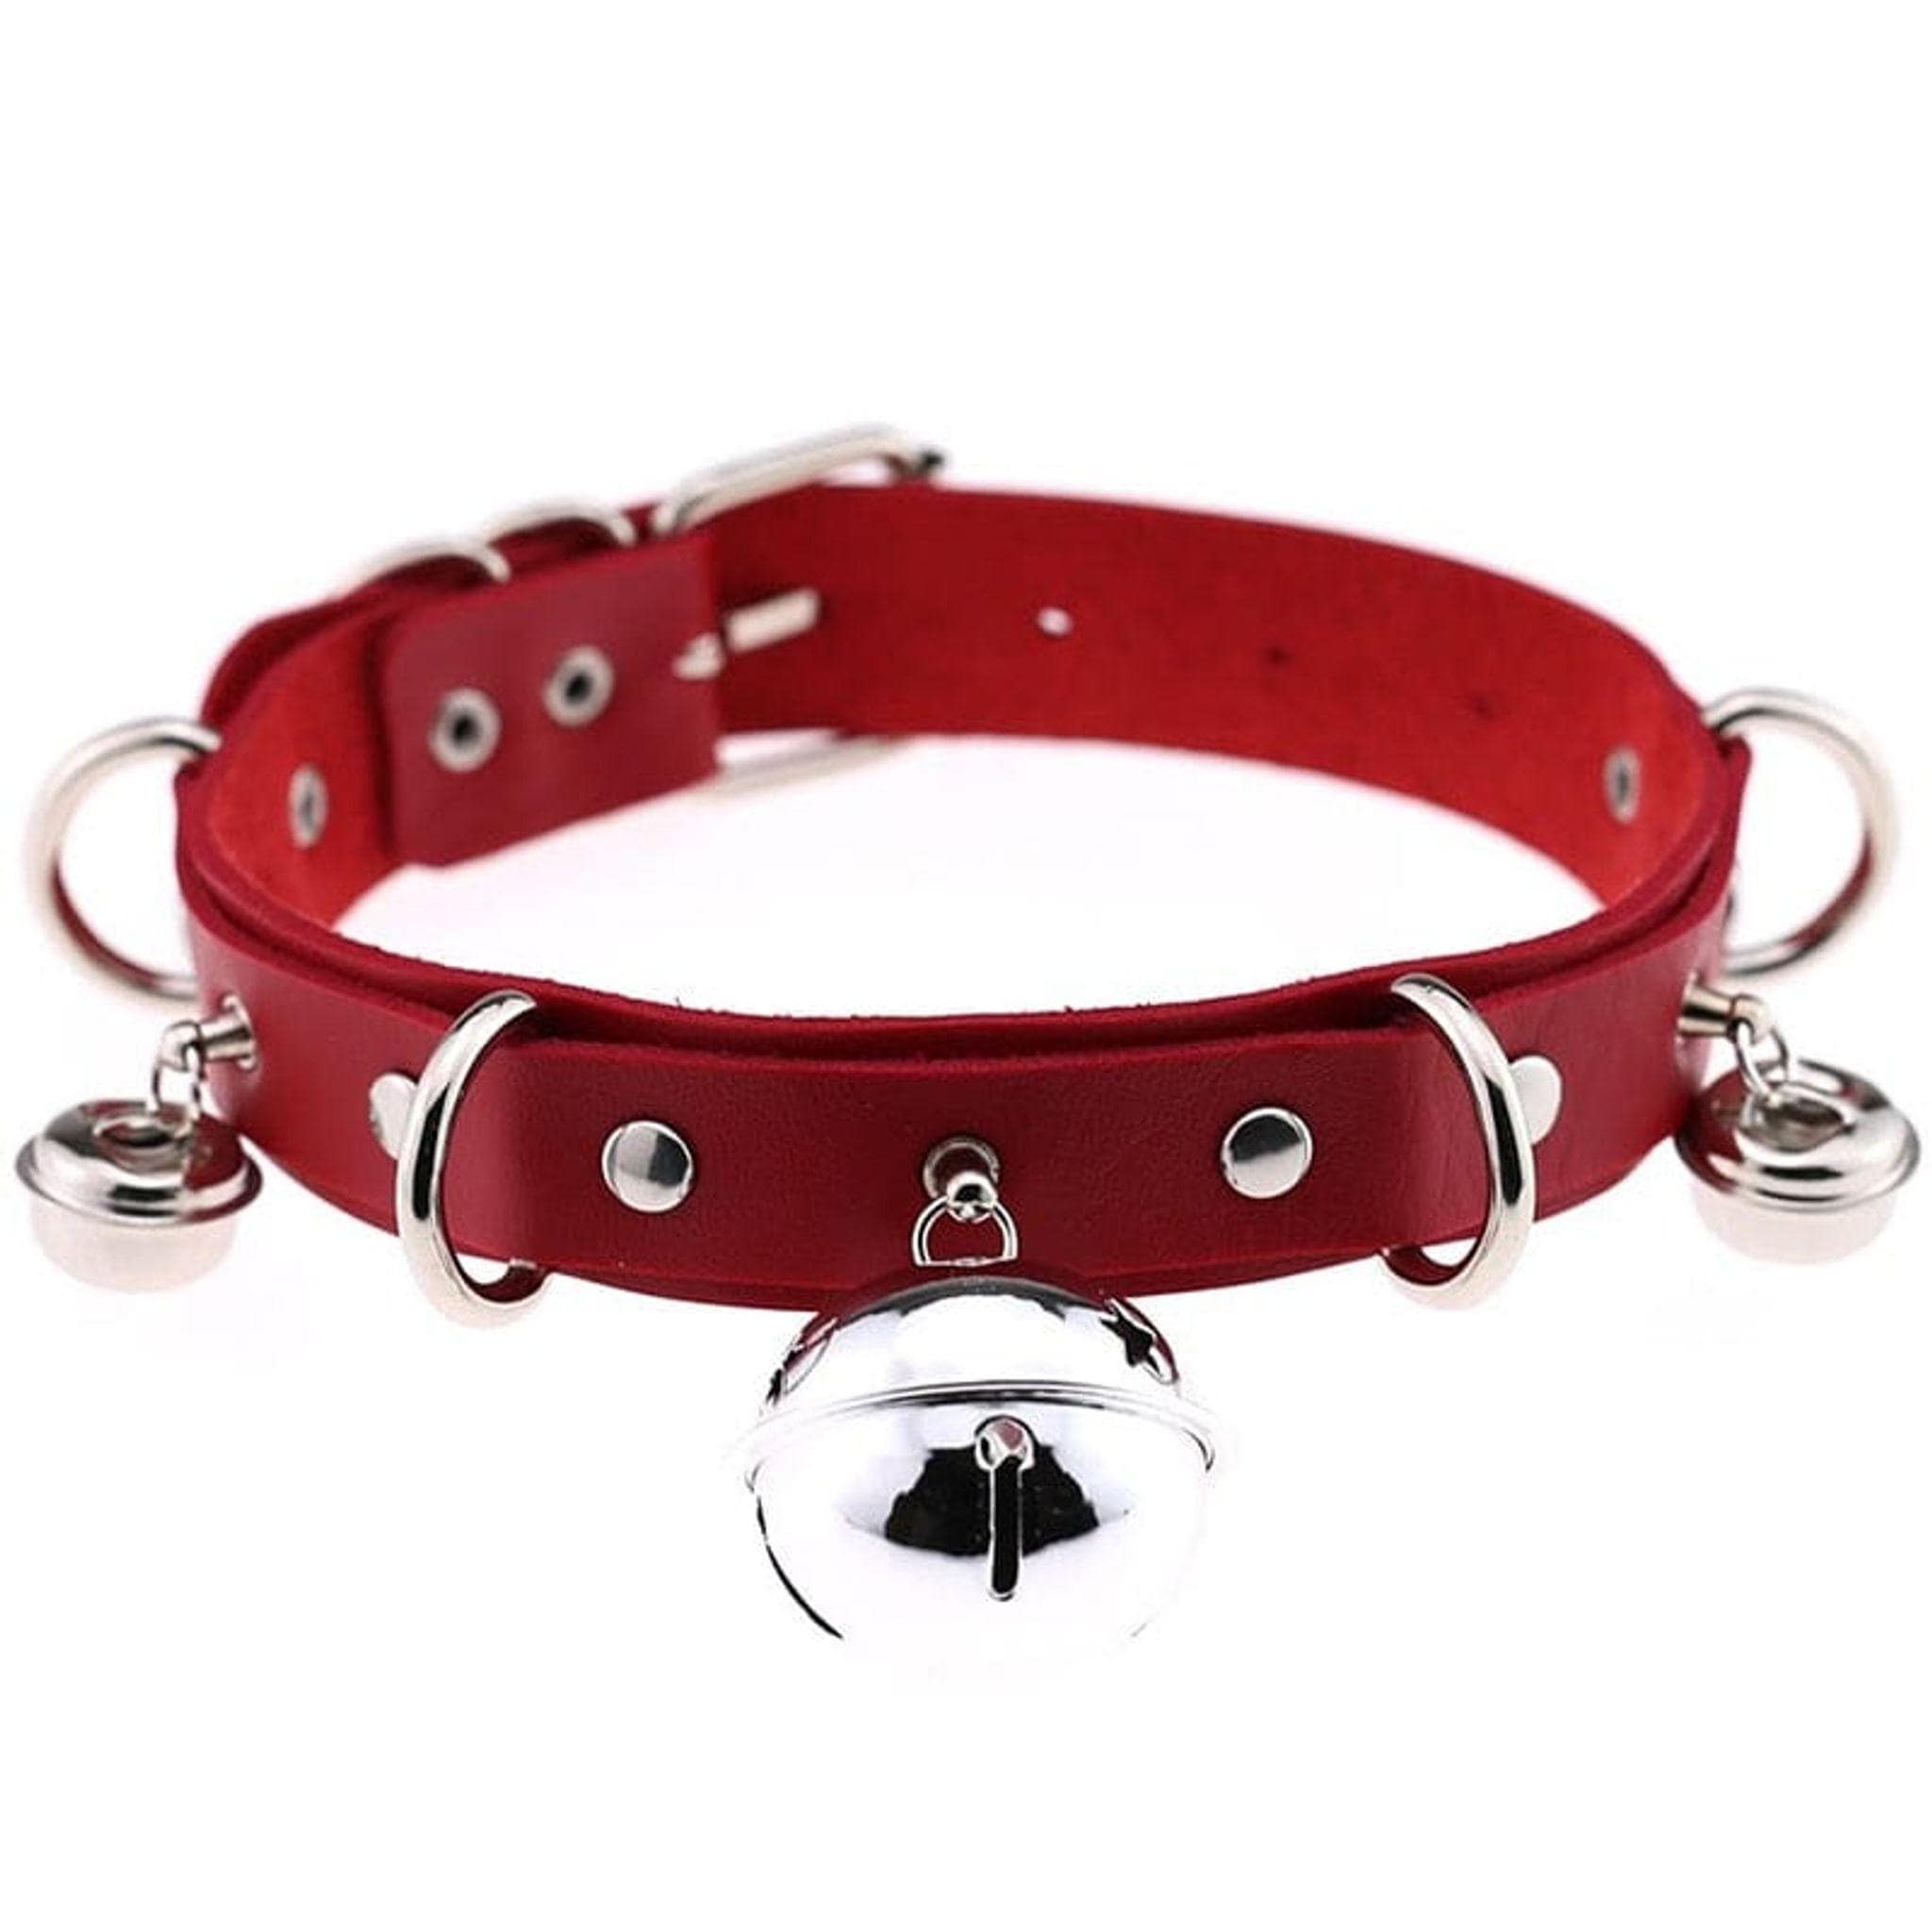 Drezden Goth Gothic Punk Chokers with Bells